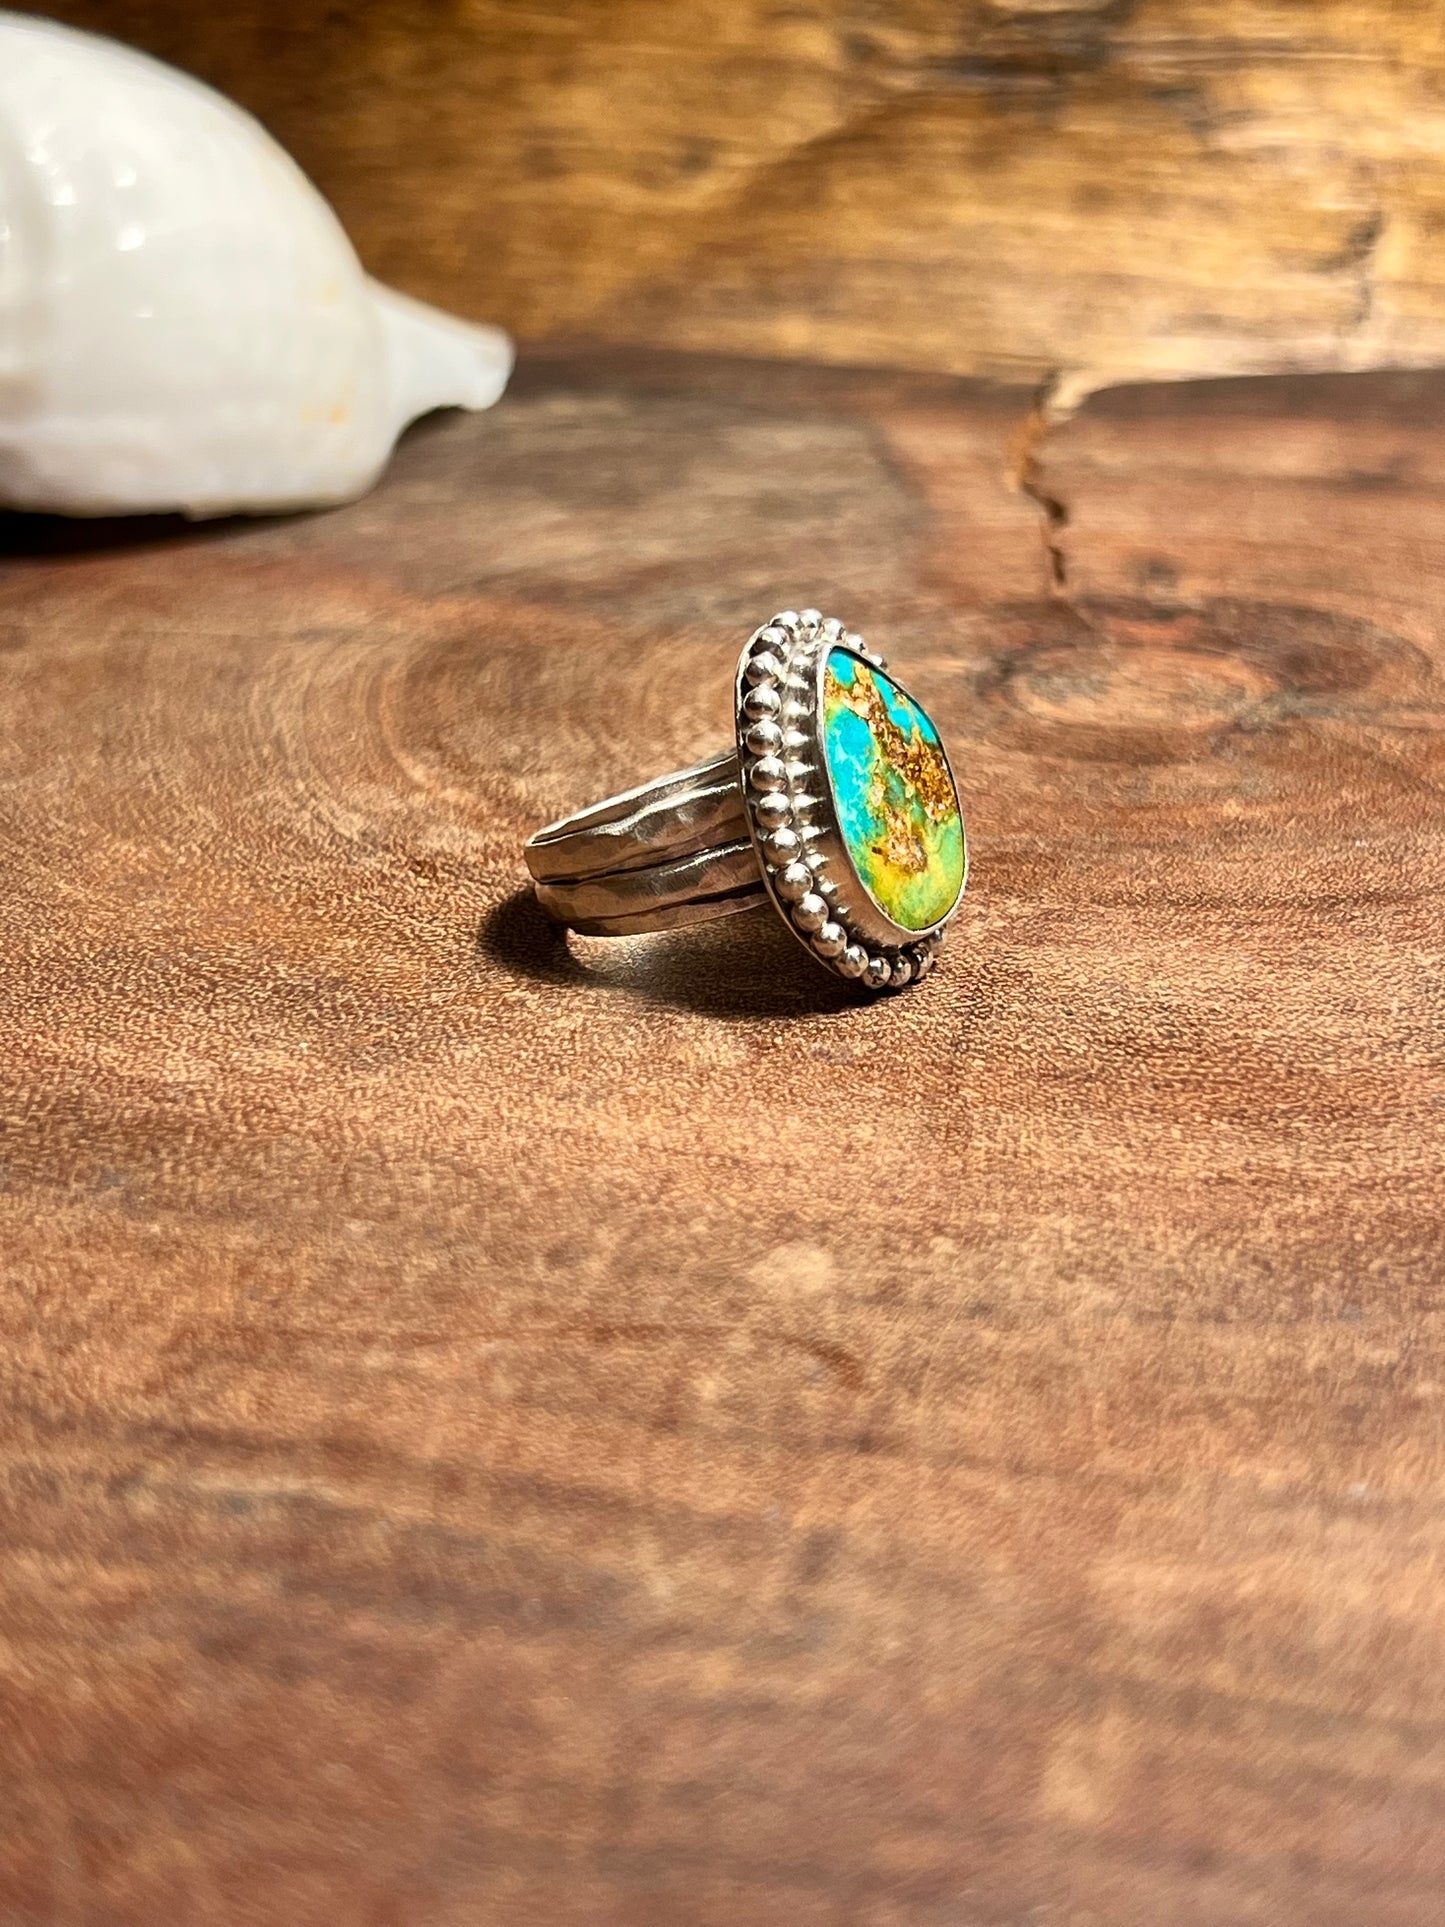 Sierra Bella Turquoise Sterling Silver Statement Ring